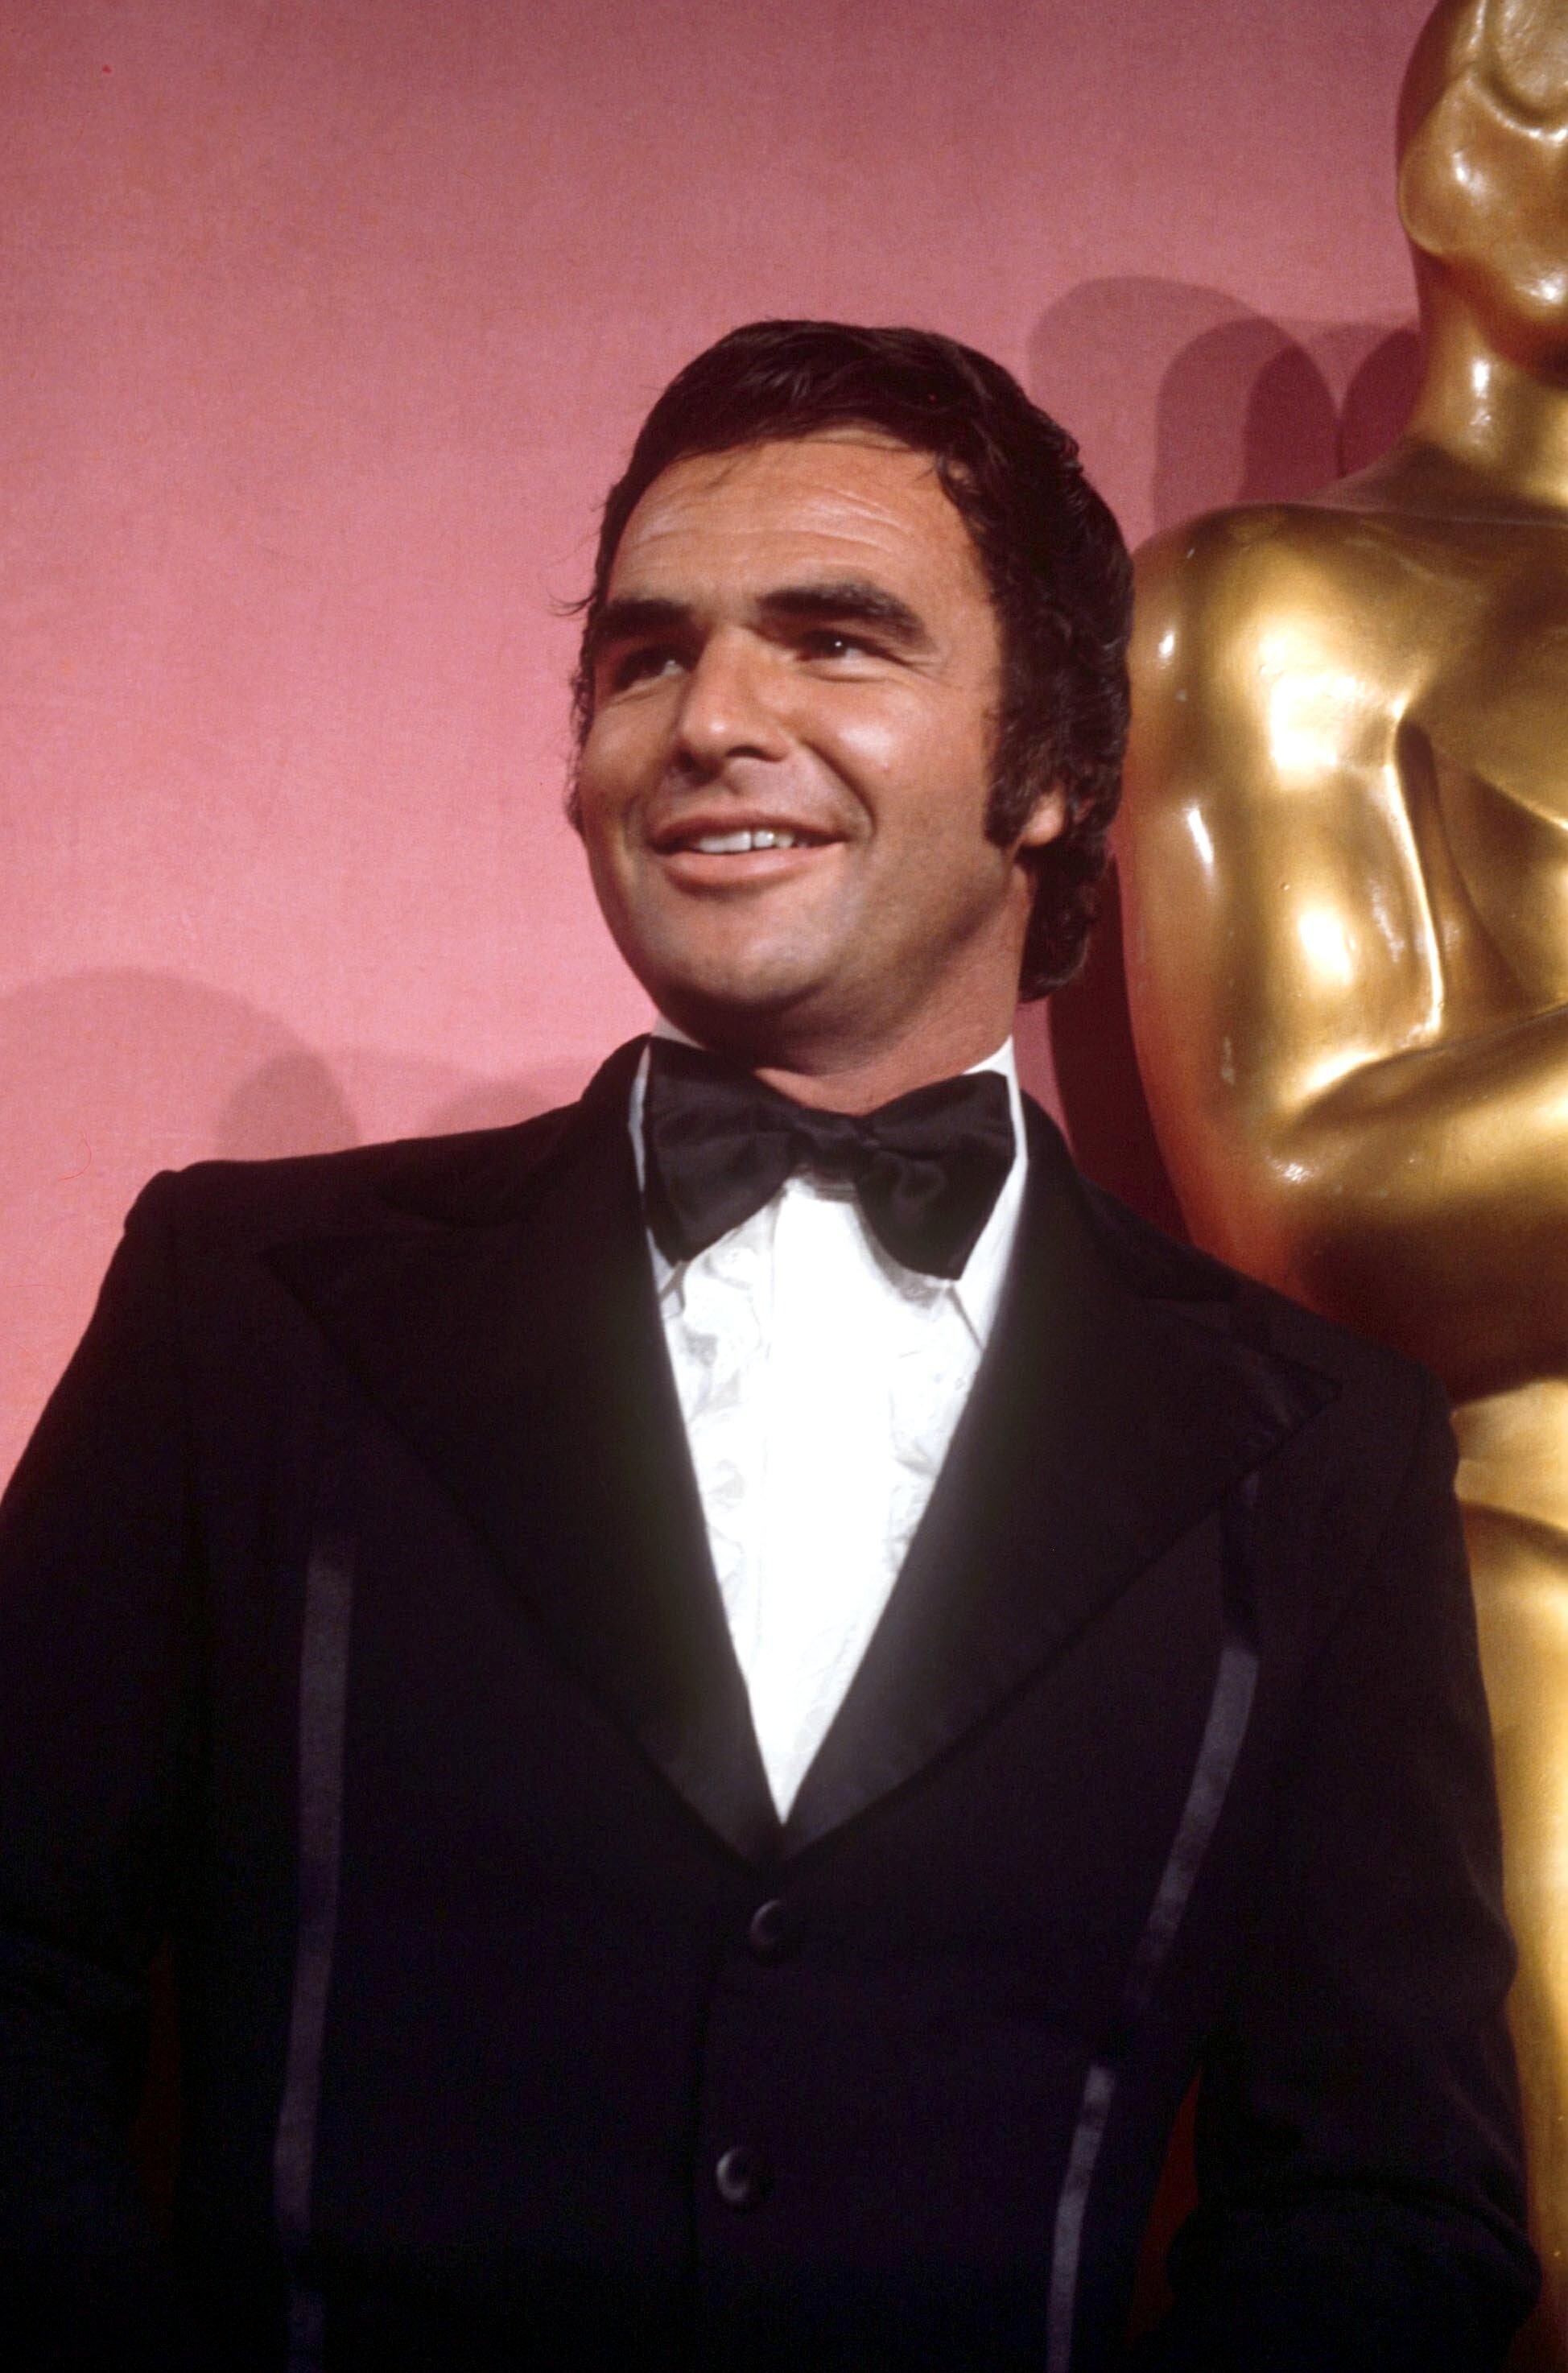 Burt Reynolds: A sex symbol and icon of American popular culture, Golden Globe Award for Best Actor. 1950x2950 HD Wallpaper.